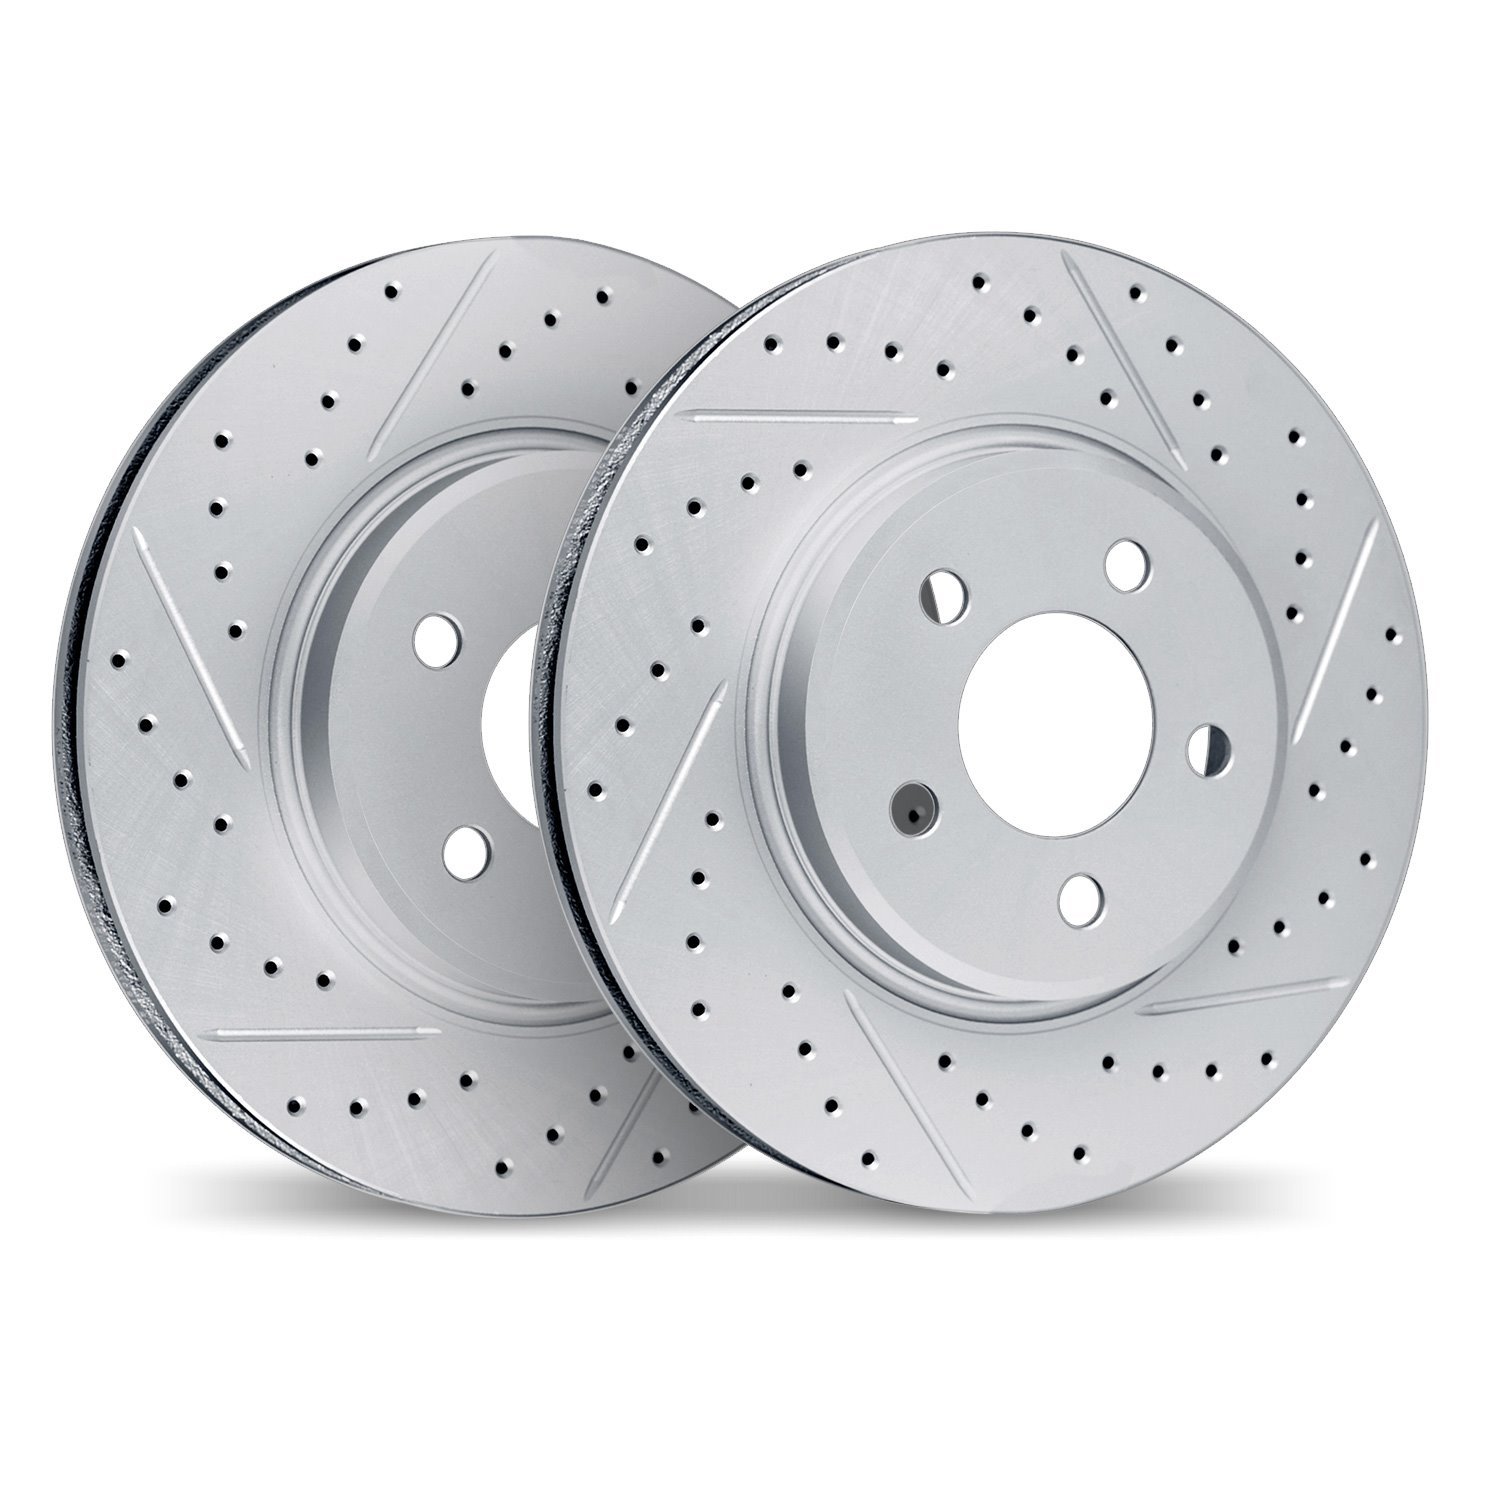 2002-54107 Geoperformance Drilled/Slotted Brake Rotors, 1991-2000 Ford/Lincoln/Mercury/Mazda, Position: Front